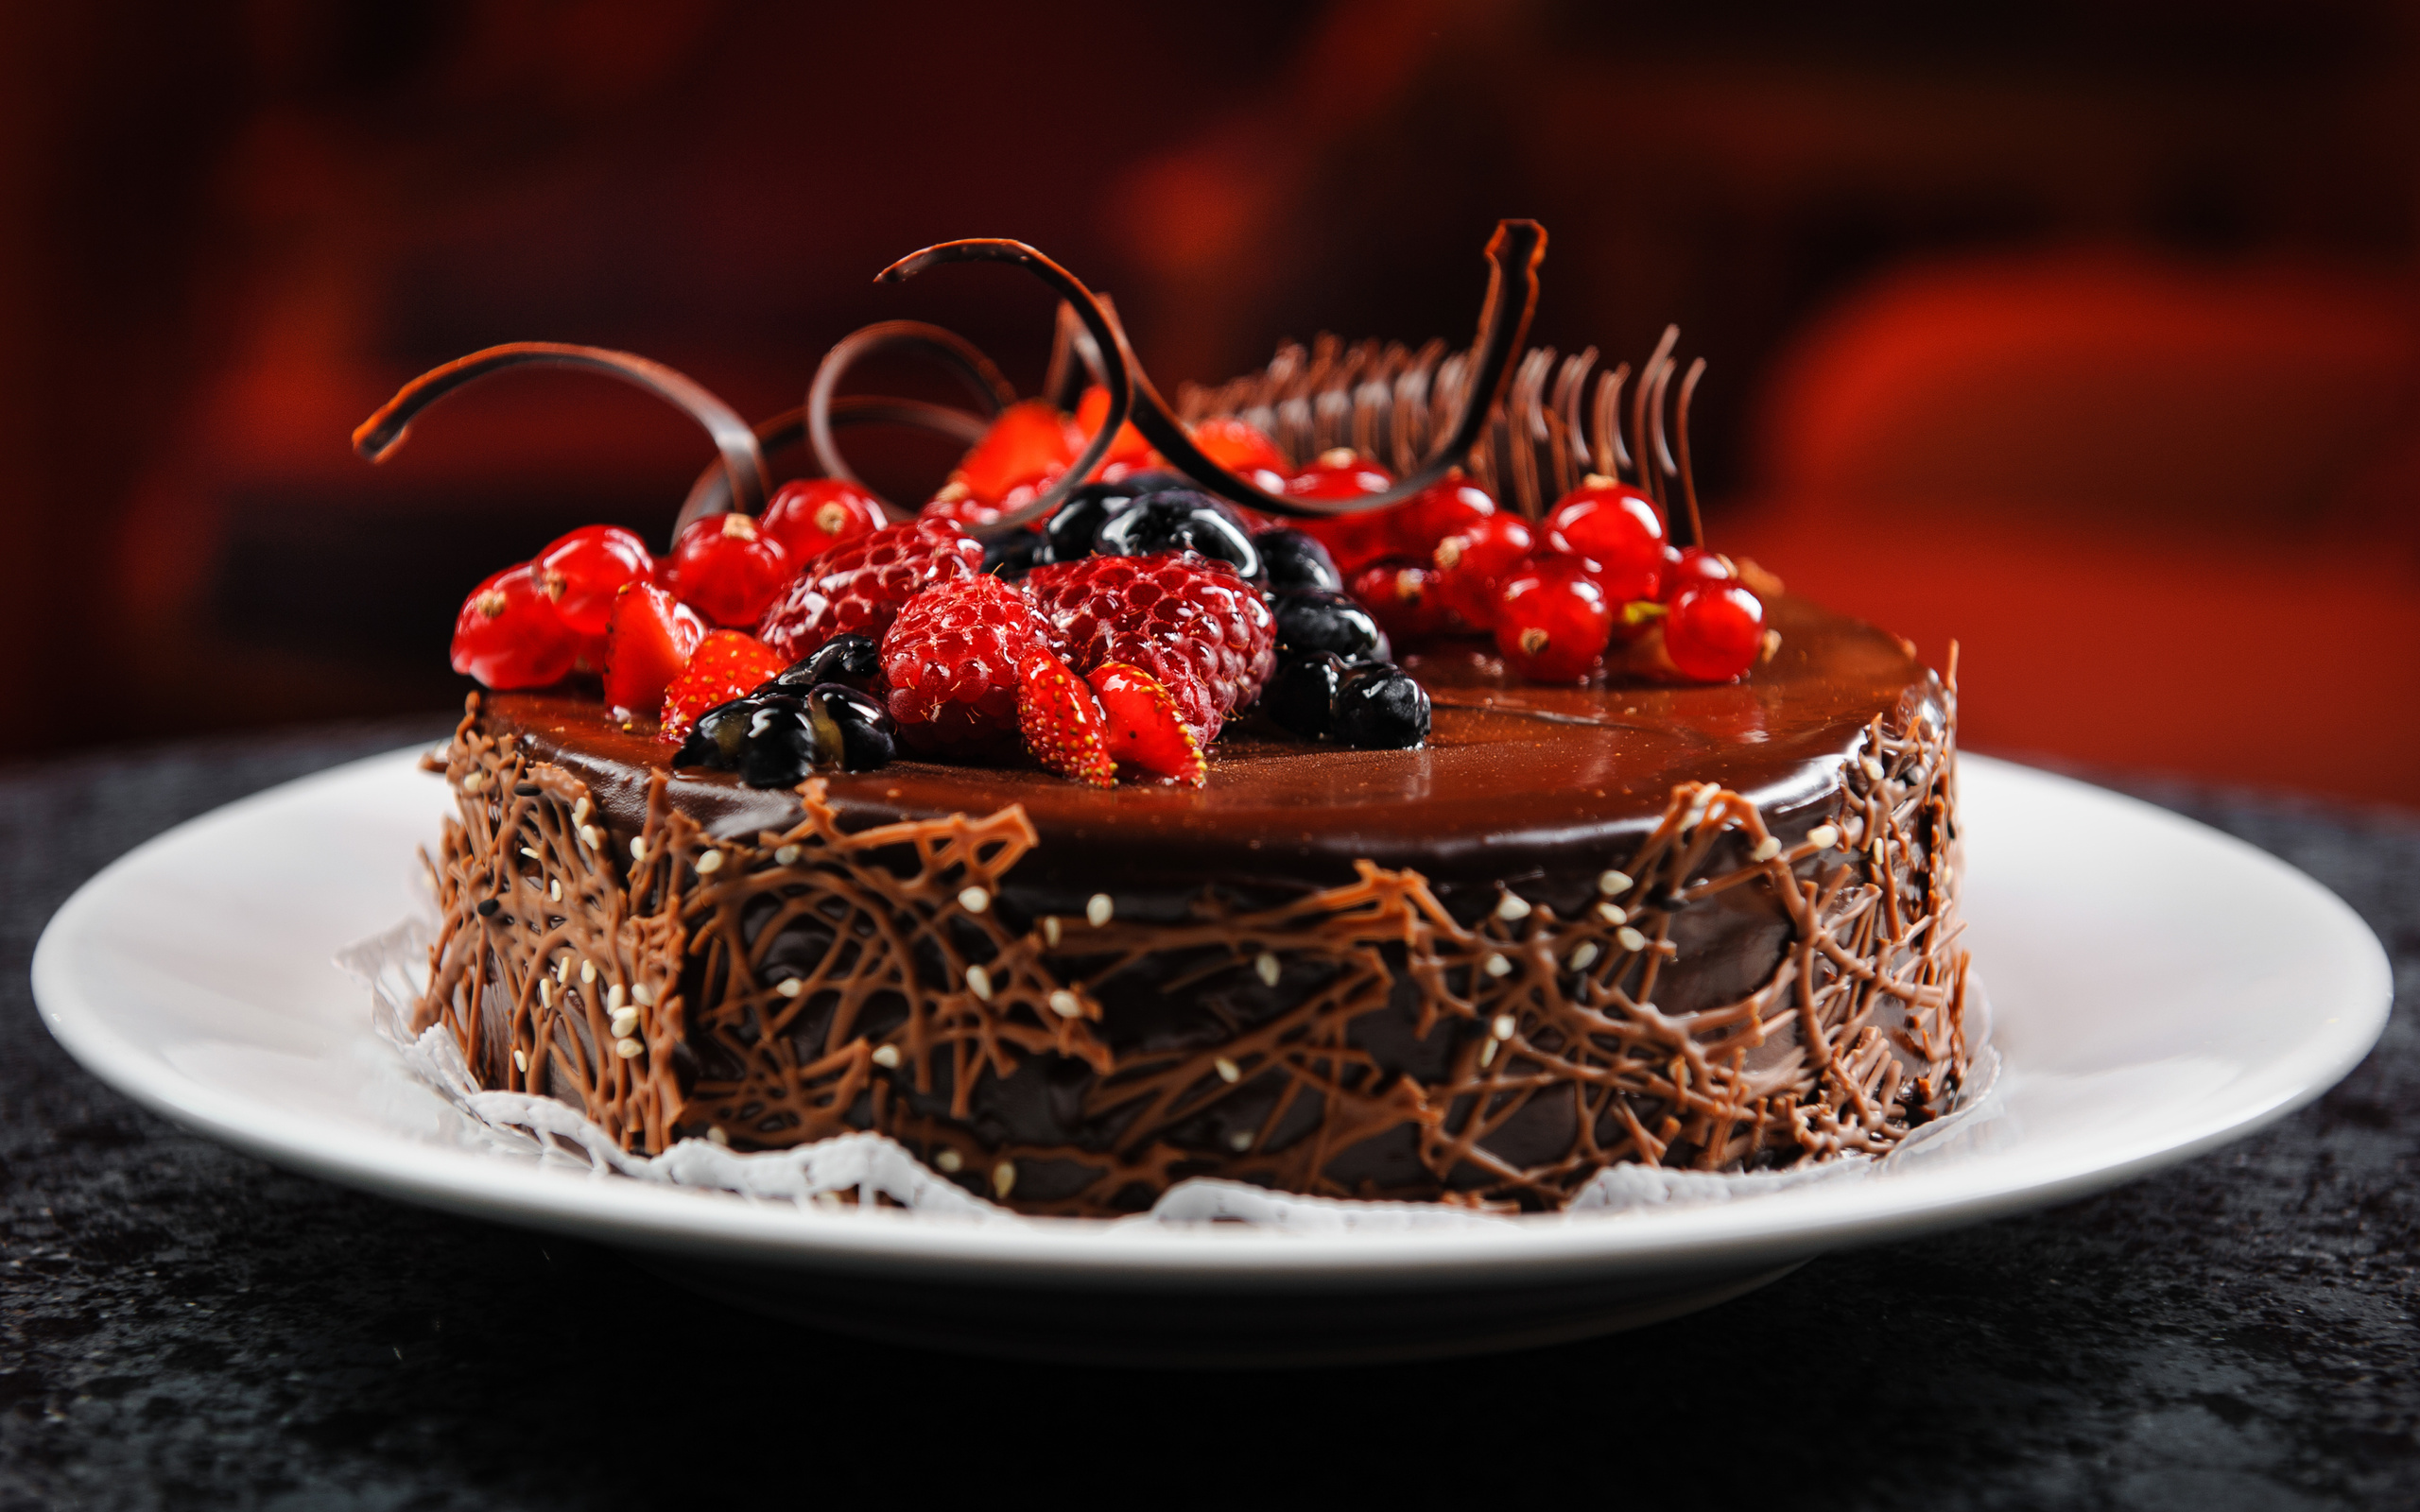 Hd Wallpaper - Chocolate Cake Images Hd , HD Wallpaper & Backgrounds